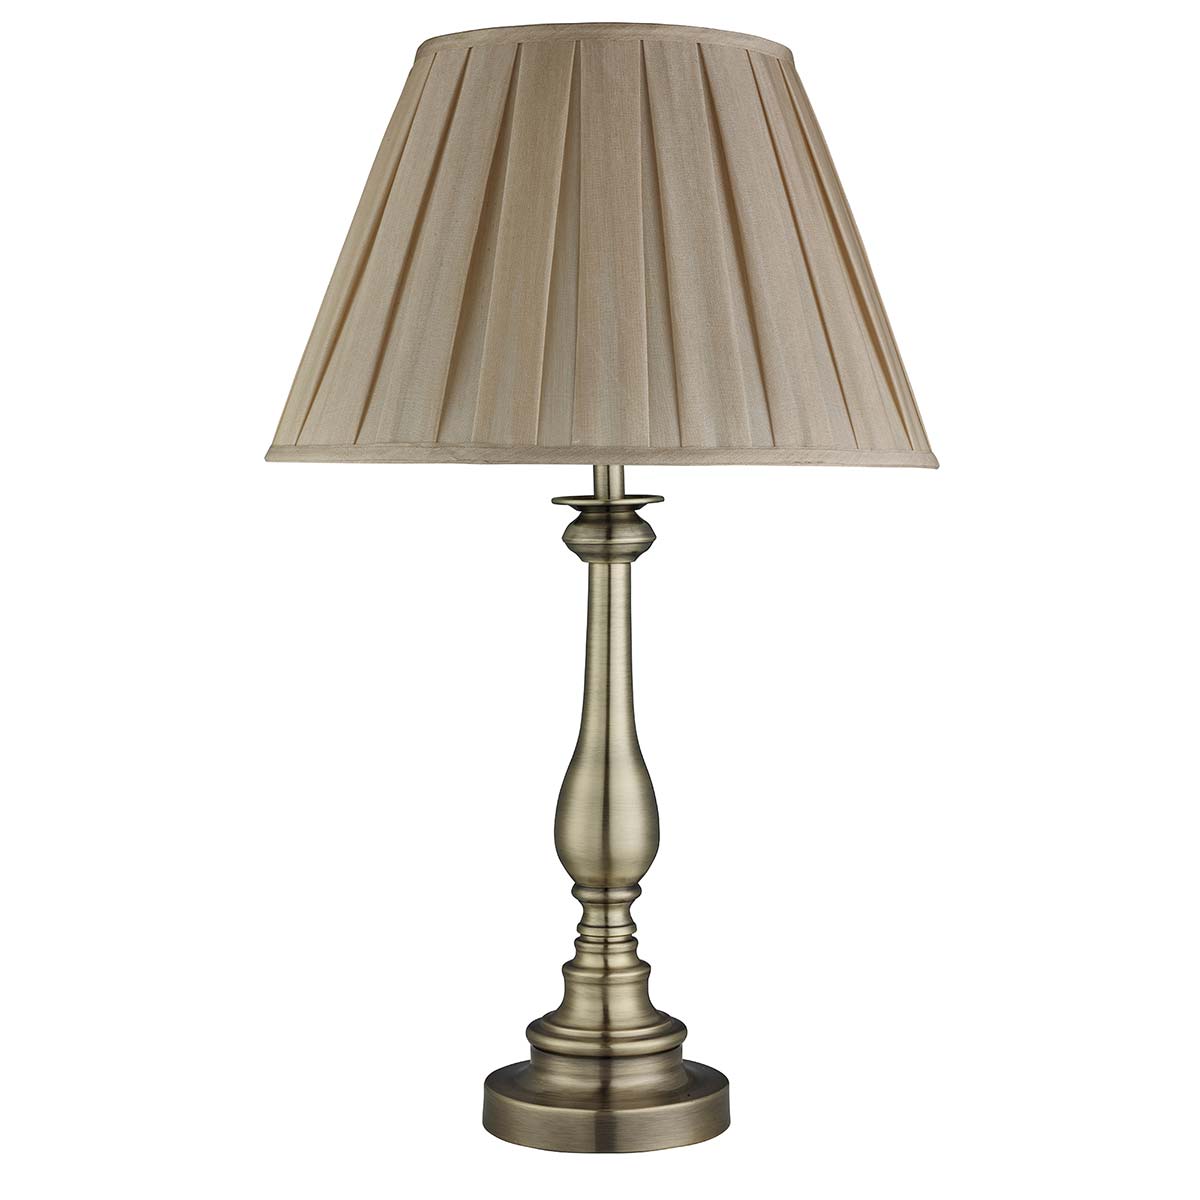 Flemish Table Lamp Antique Brass Pleated Mink Shade